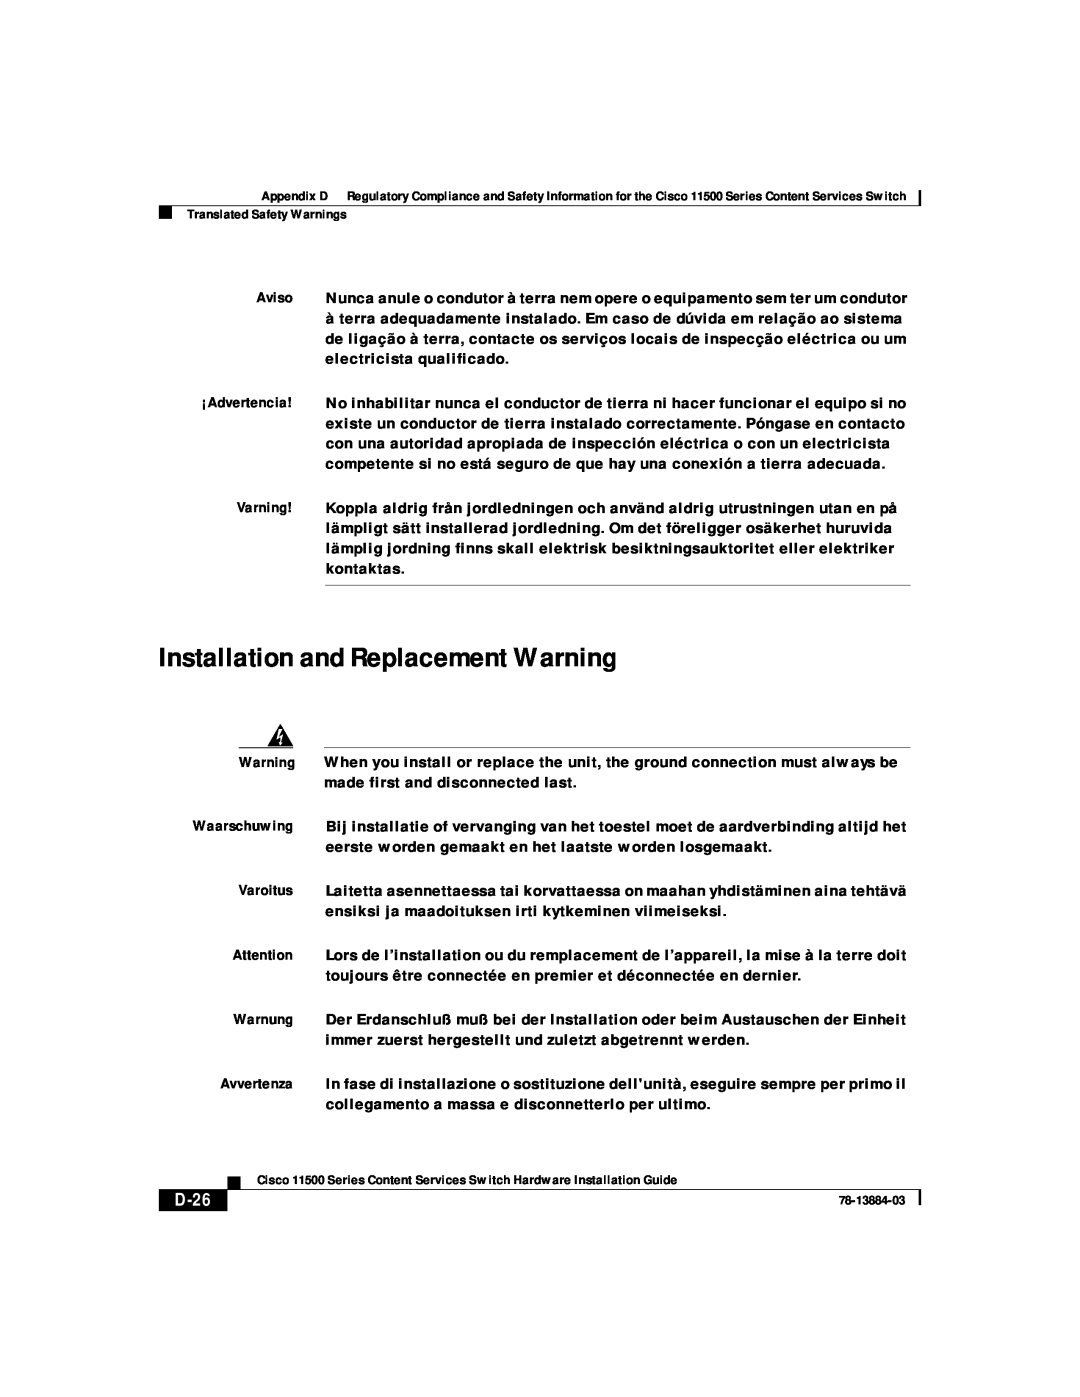 Cisco Systems 11500 Series manual Installation and Replacement Warning, D-26 